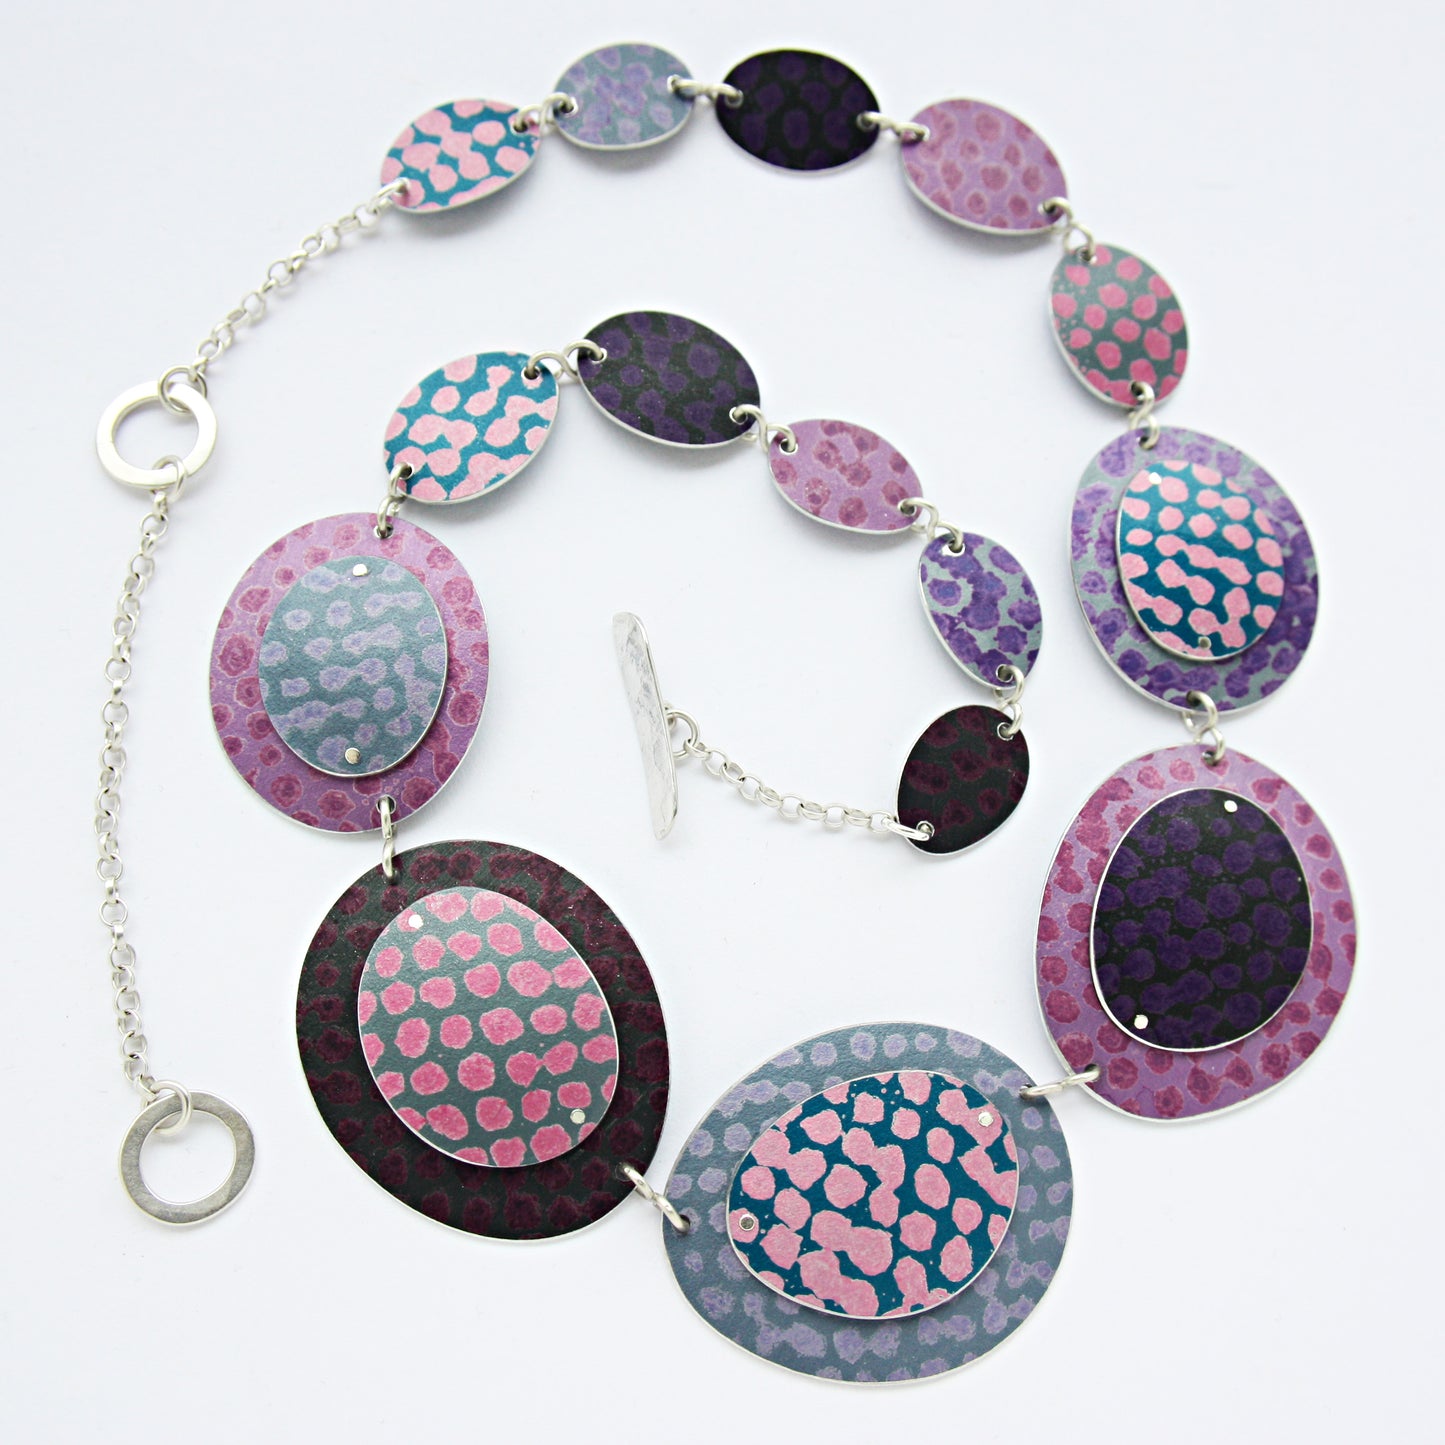 SL53 Hotchpotch spotty riveted ovals necklace in mauve, pink, and berry